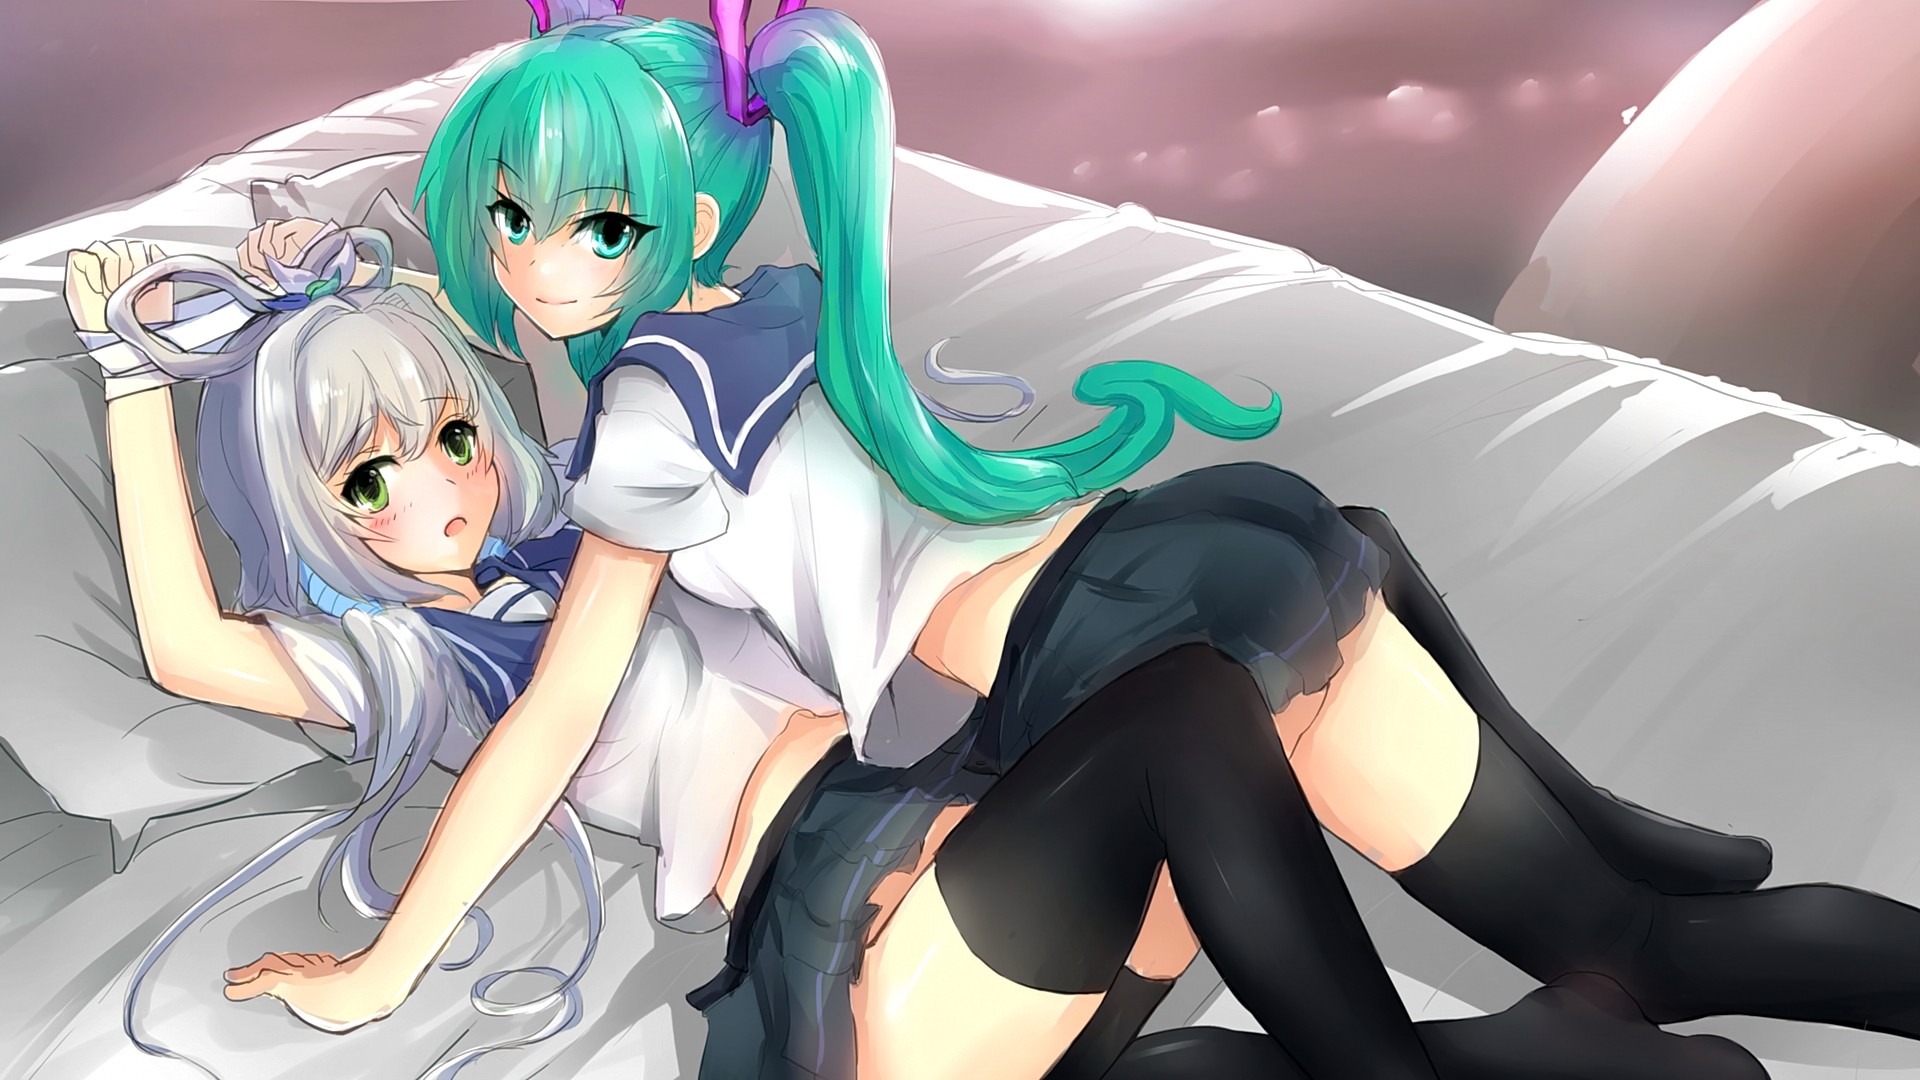 Anime 1920x1080 anime anime girls Vocaloid Hatsune Miku Luo Tianyi (vocaloid) thigh-highs in bed ass cyan hair blonde aqua eyes green eyes open mouth smiling short hair long hair looking at viewer lesbians two women stockings black stockings lying on back bent over skirt